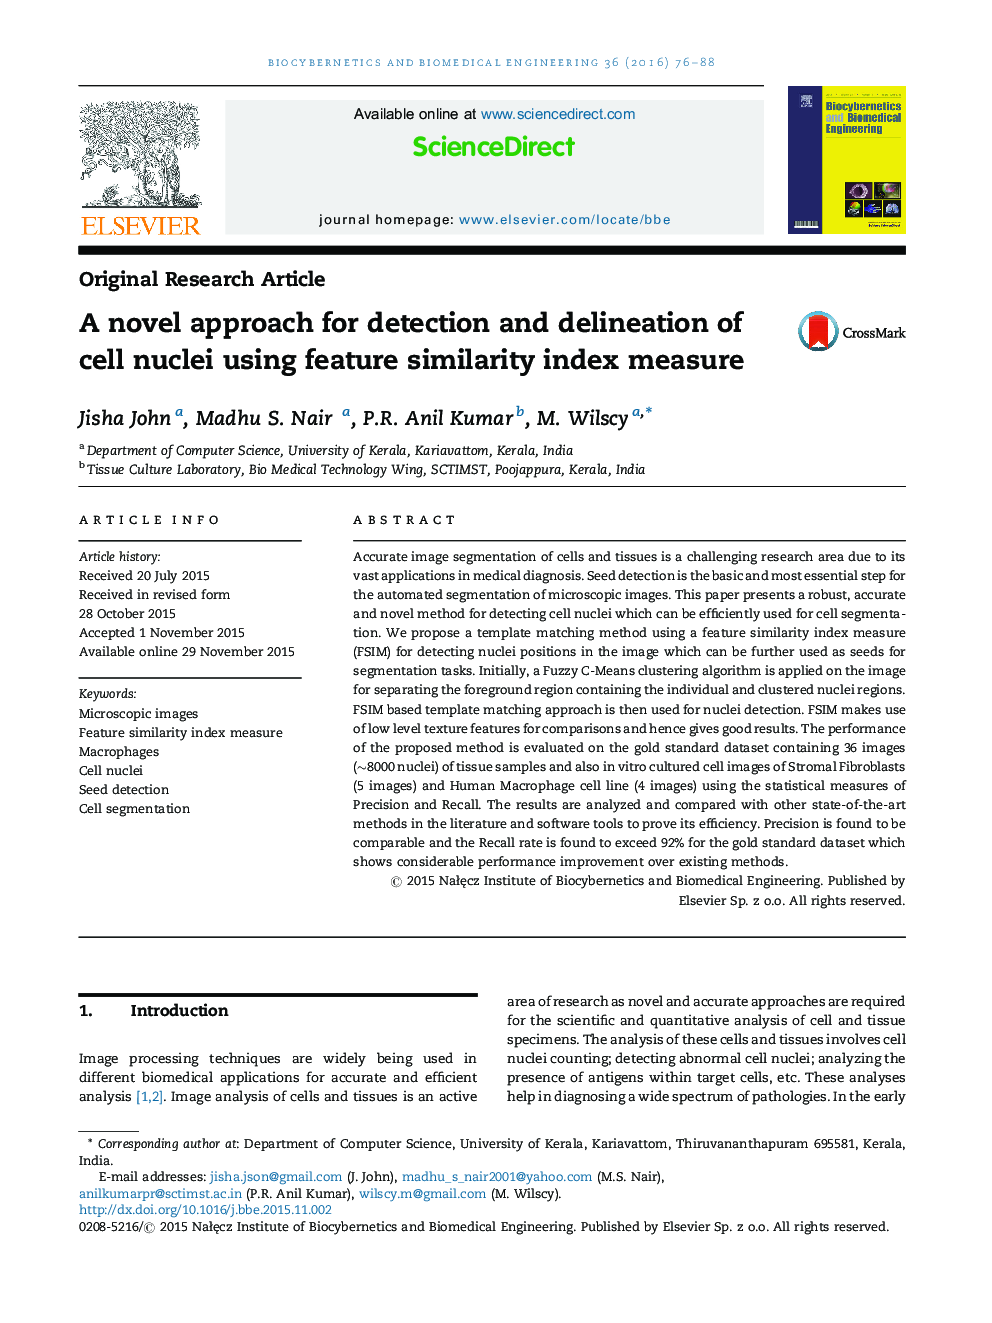 A novel approach for detection and delineation of cell nuclei using feature similarity index measure